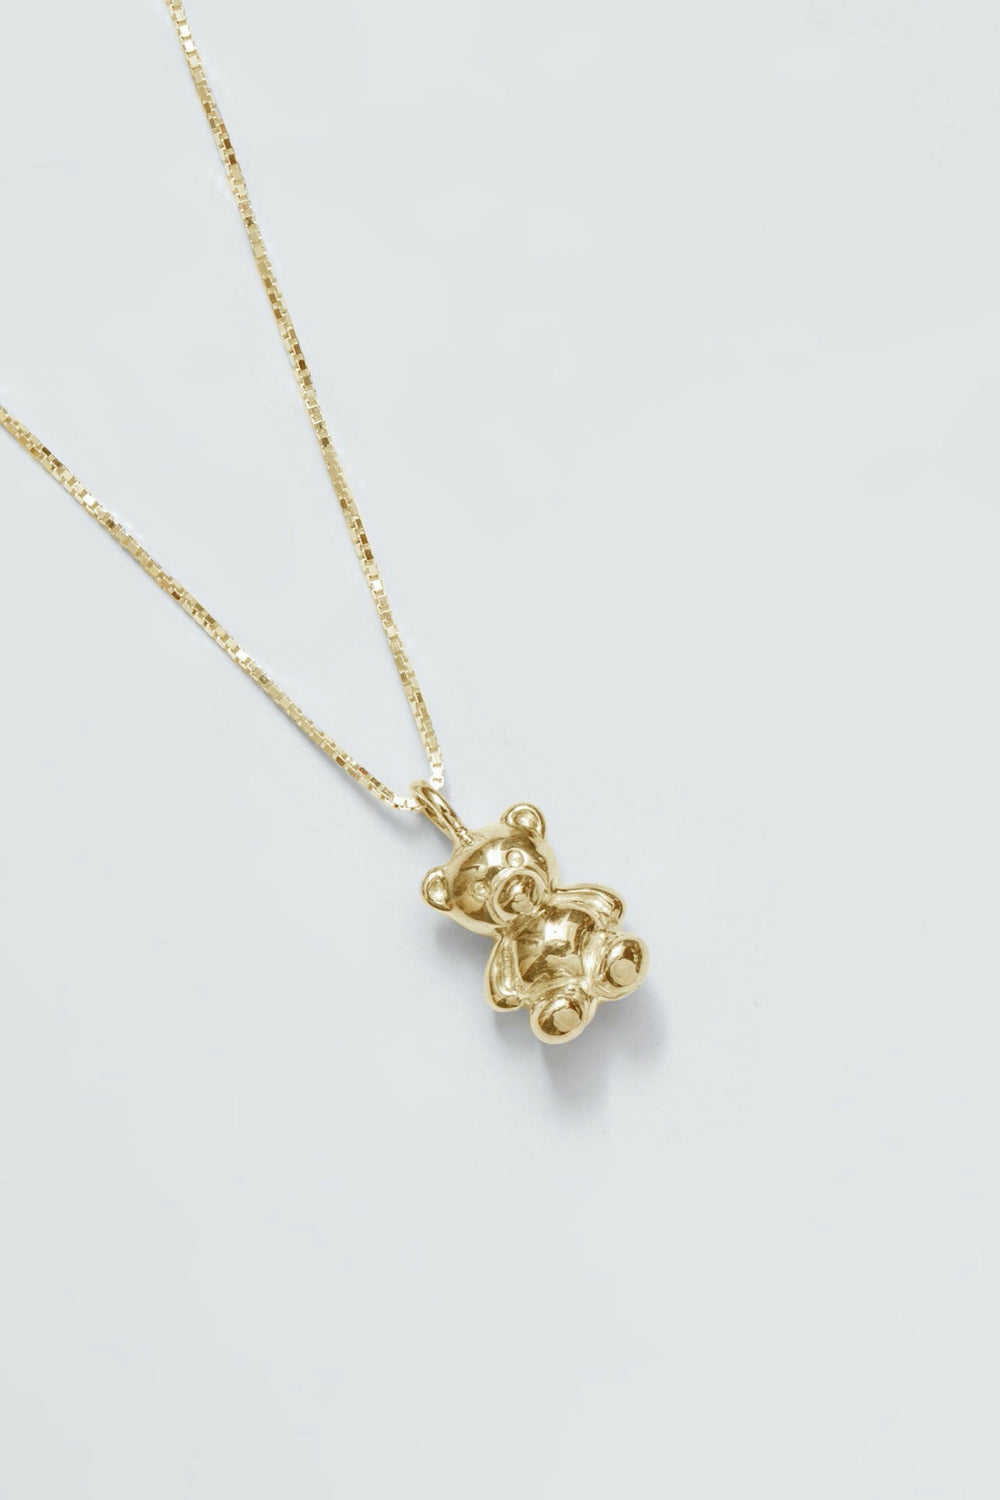 Gold Charm Teddy Necklace